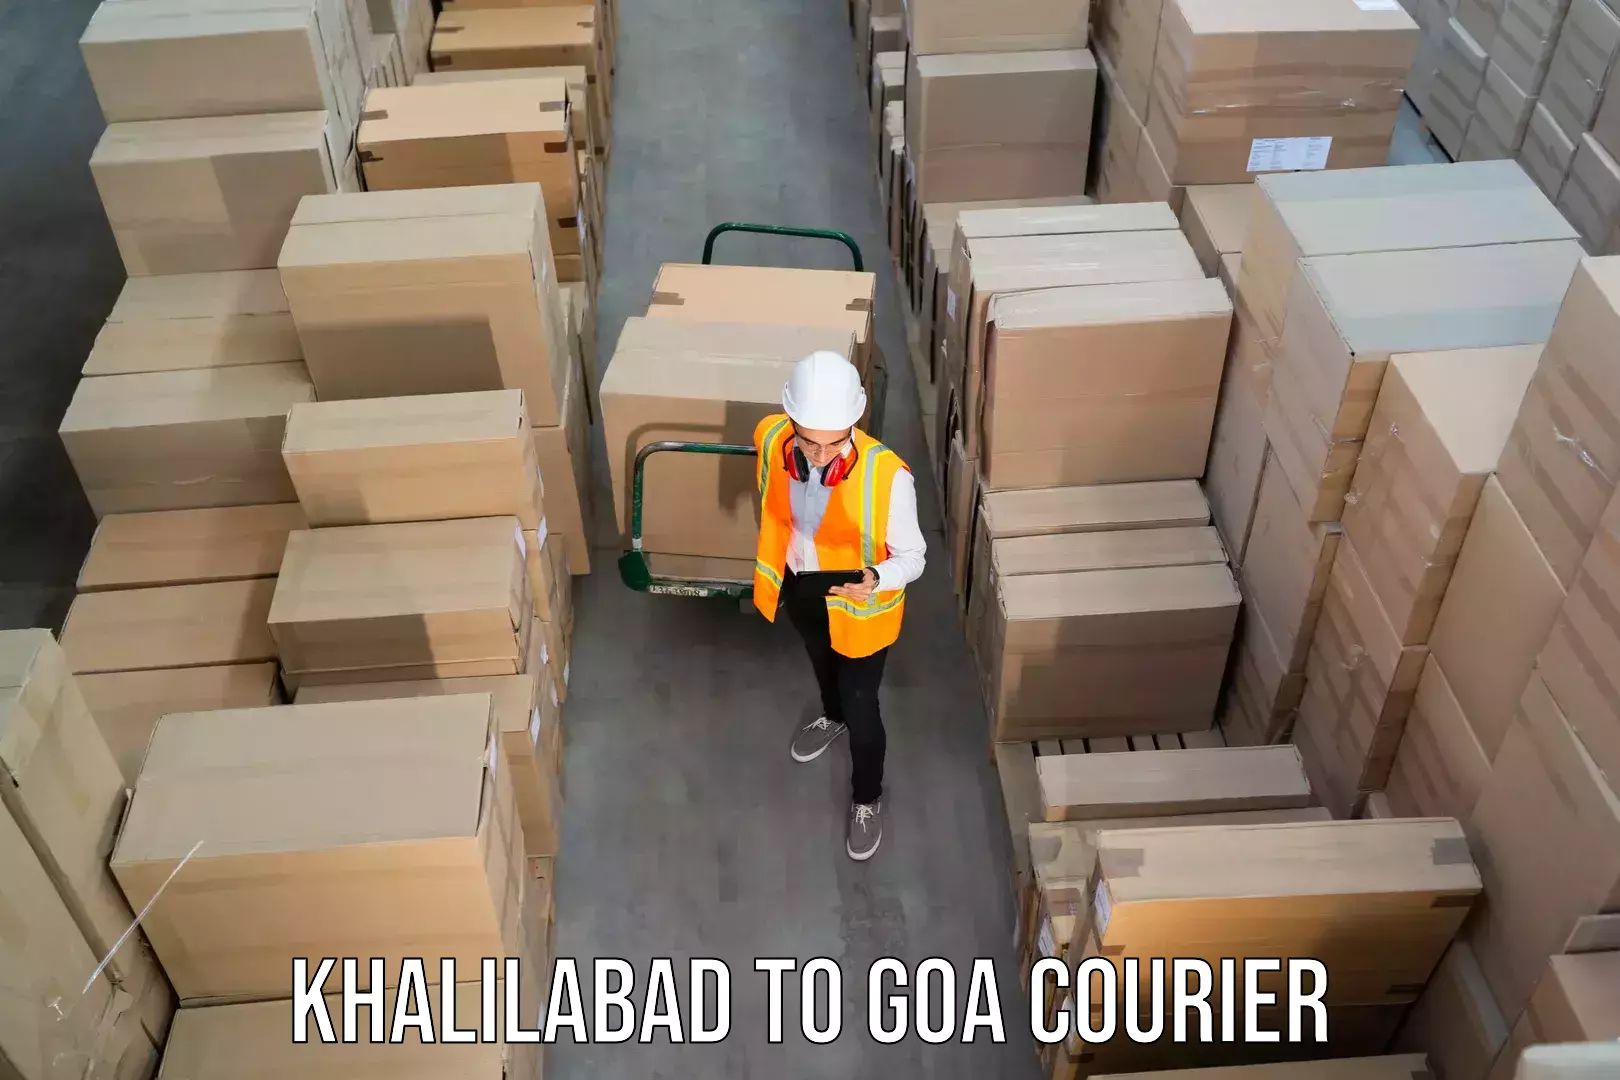 Reliable parcel services Khalilabad to Goa